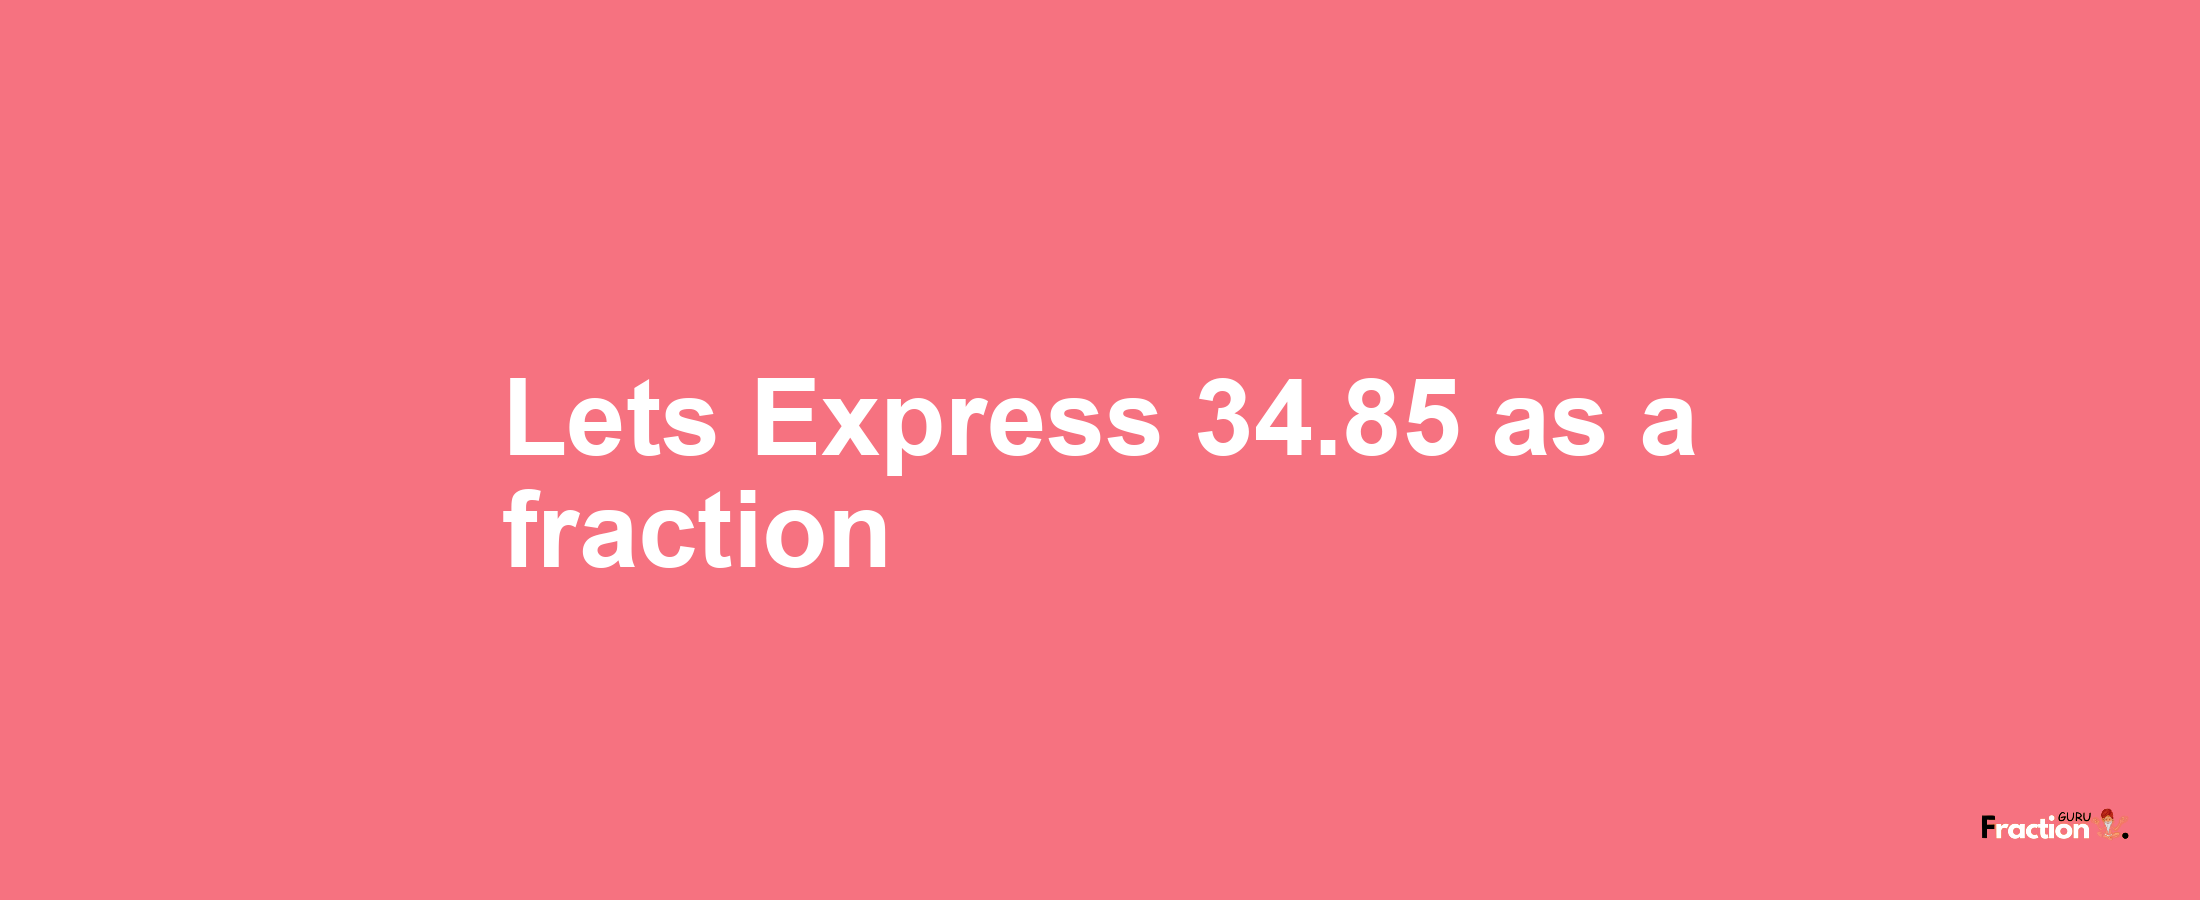 Lets Express 34.85 as afraction